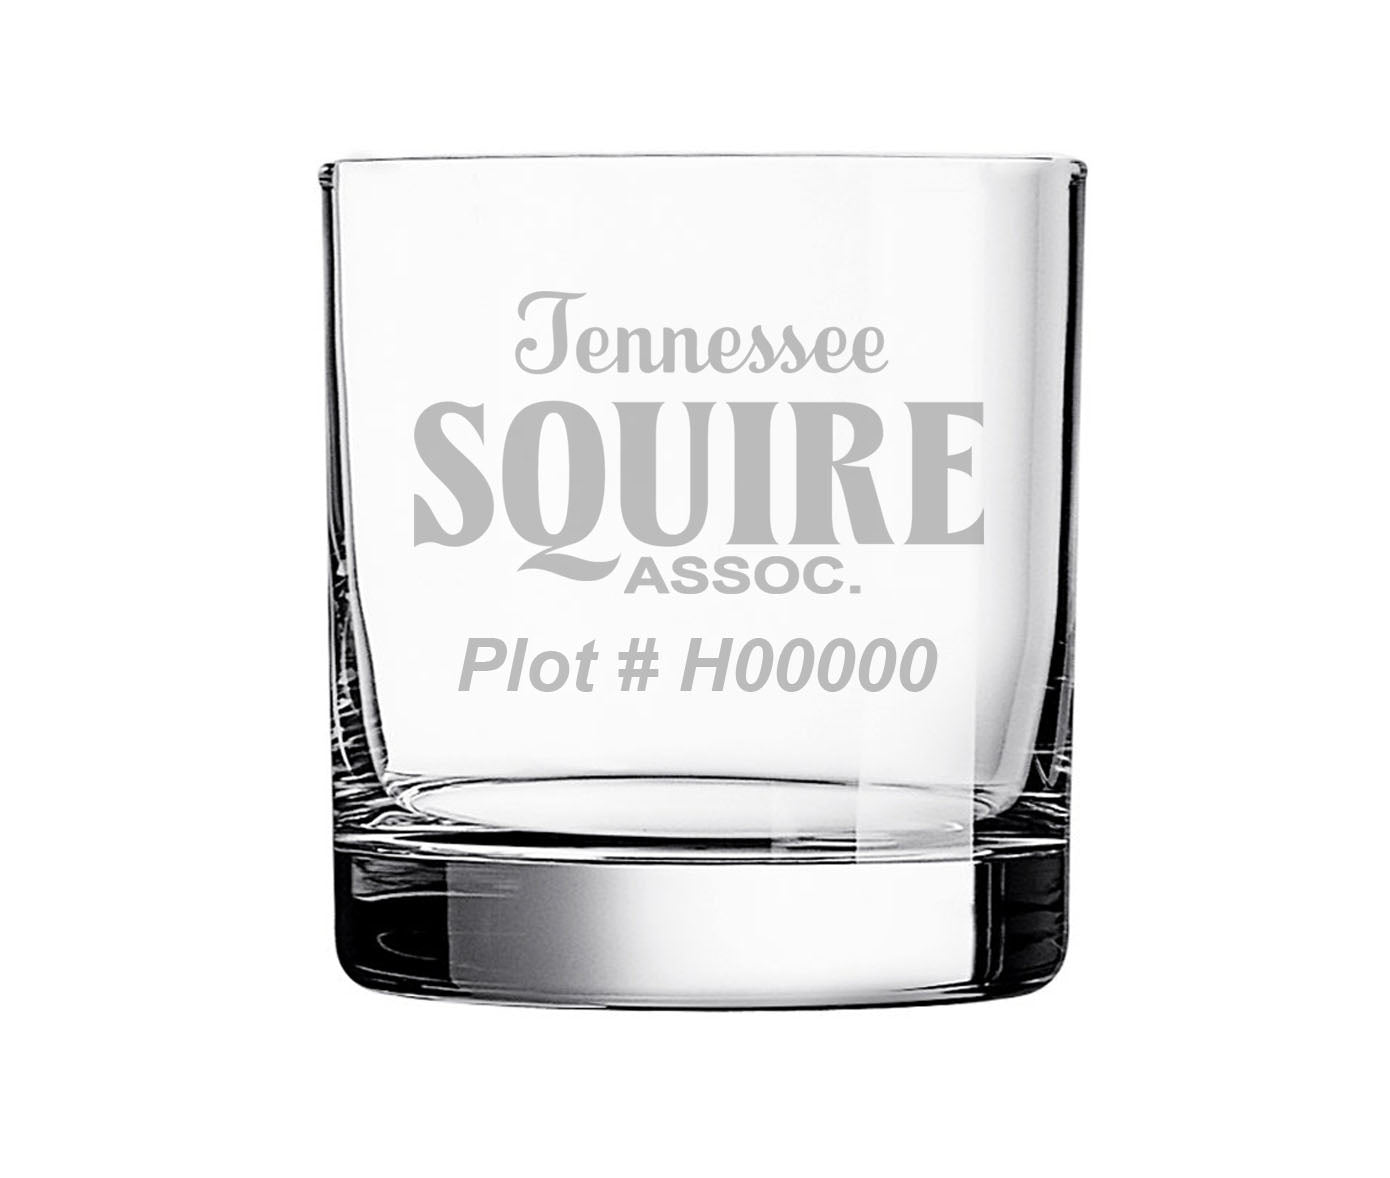 Jack Daniel's Tennessee Squire Association w/ Plot Number - Whiskey Rocks Glass - 11oz